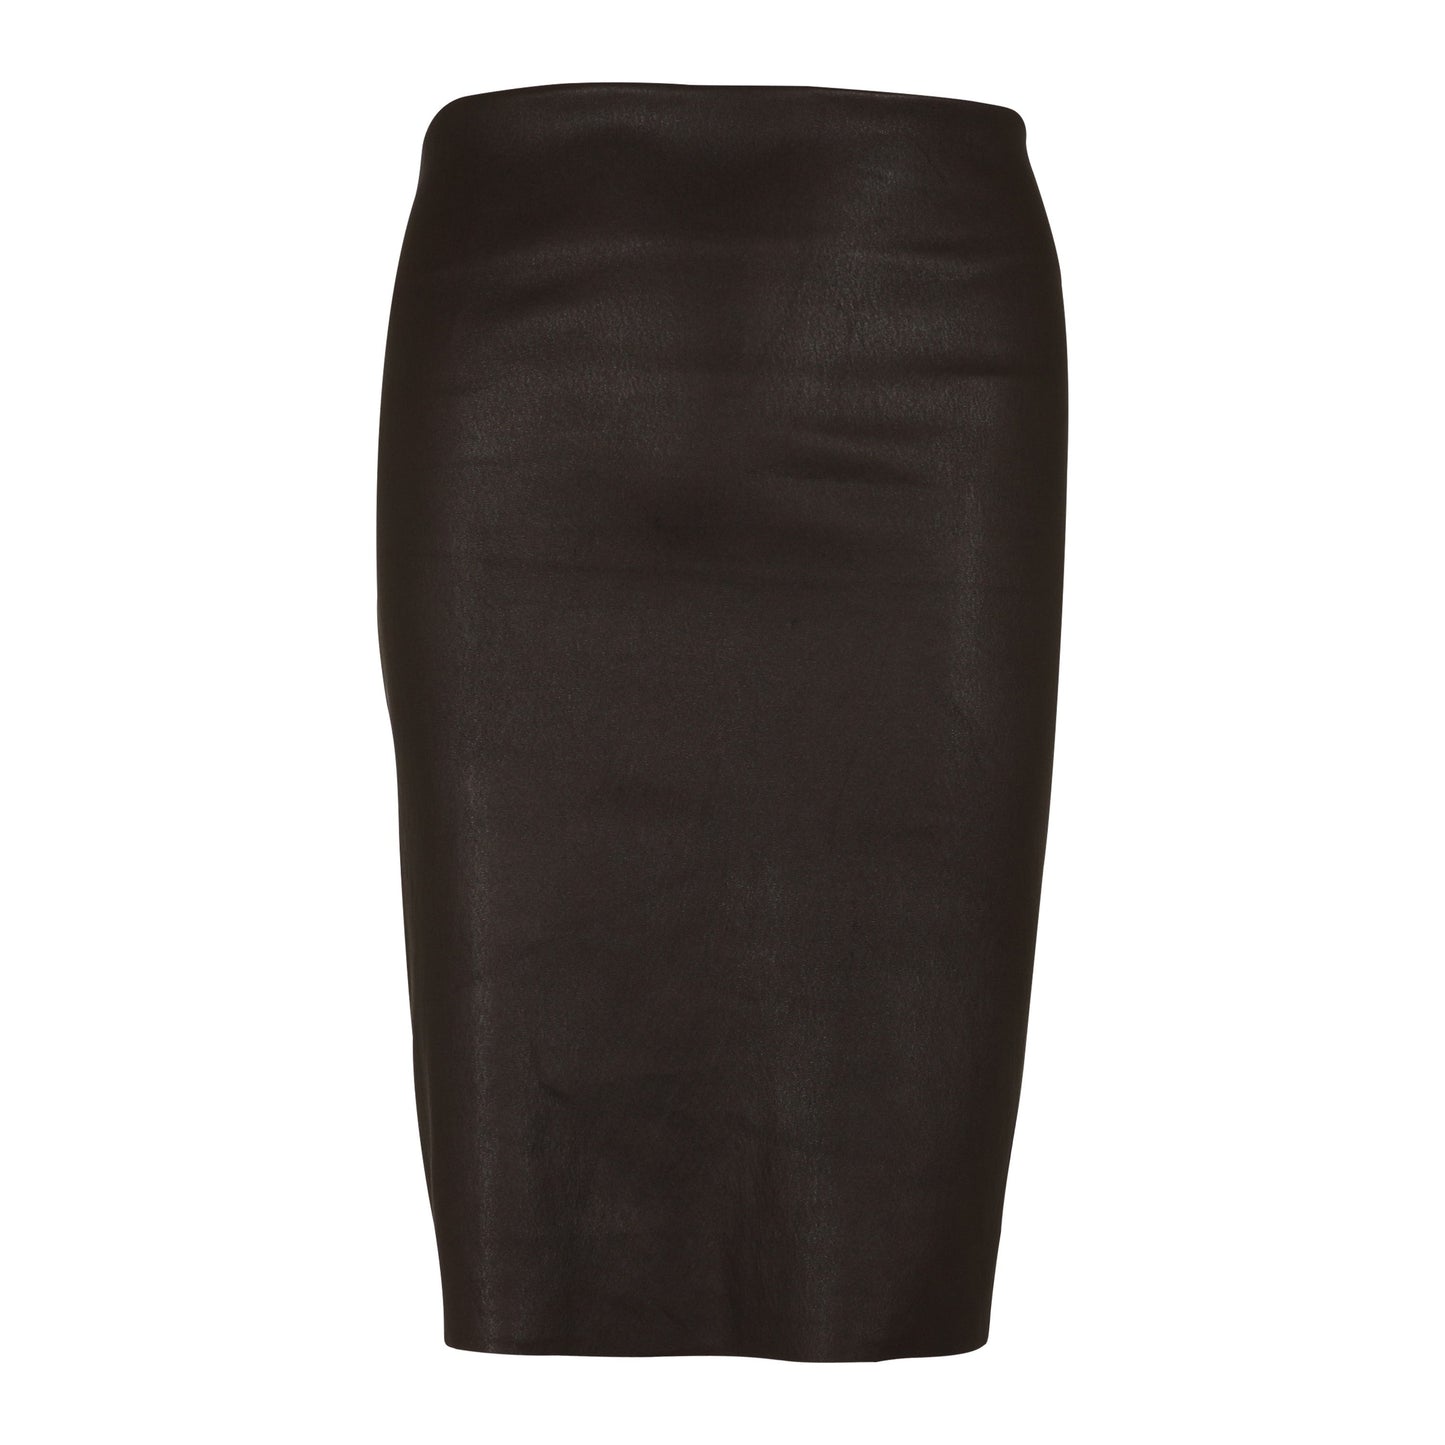 Leather skirts - navy